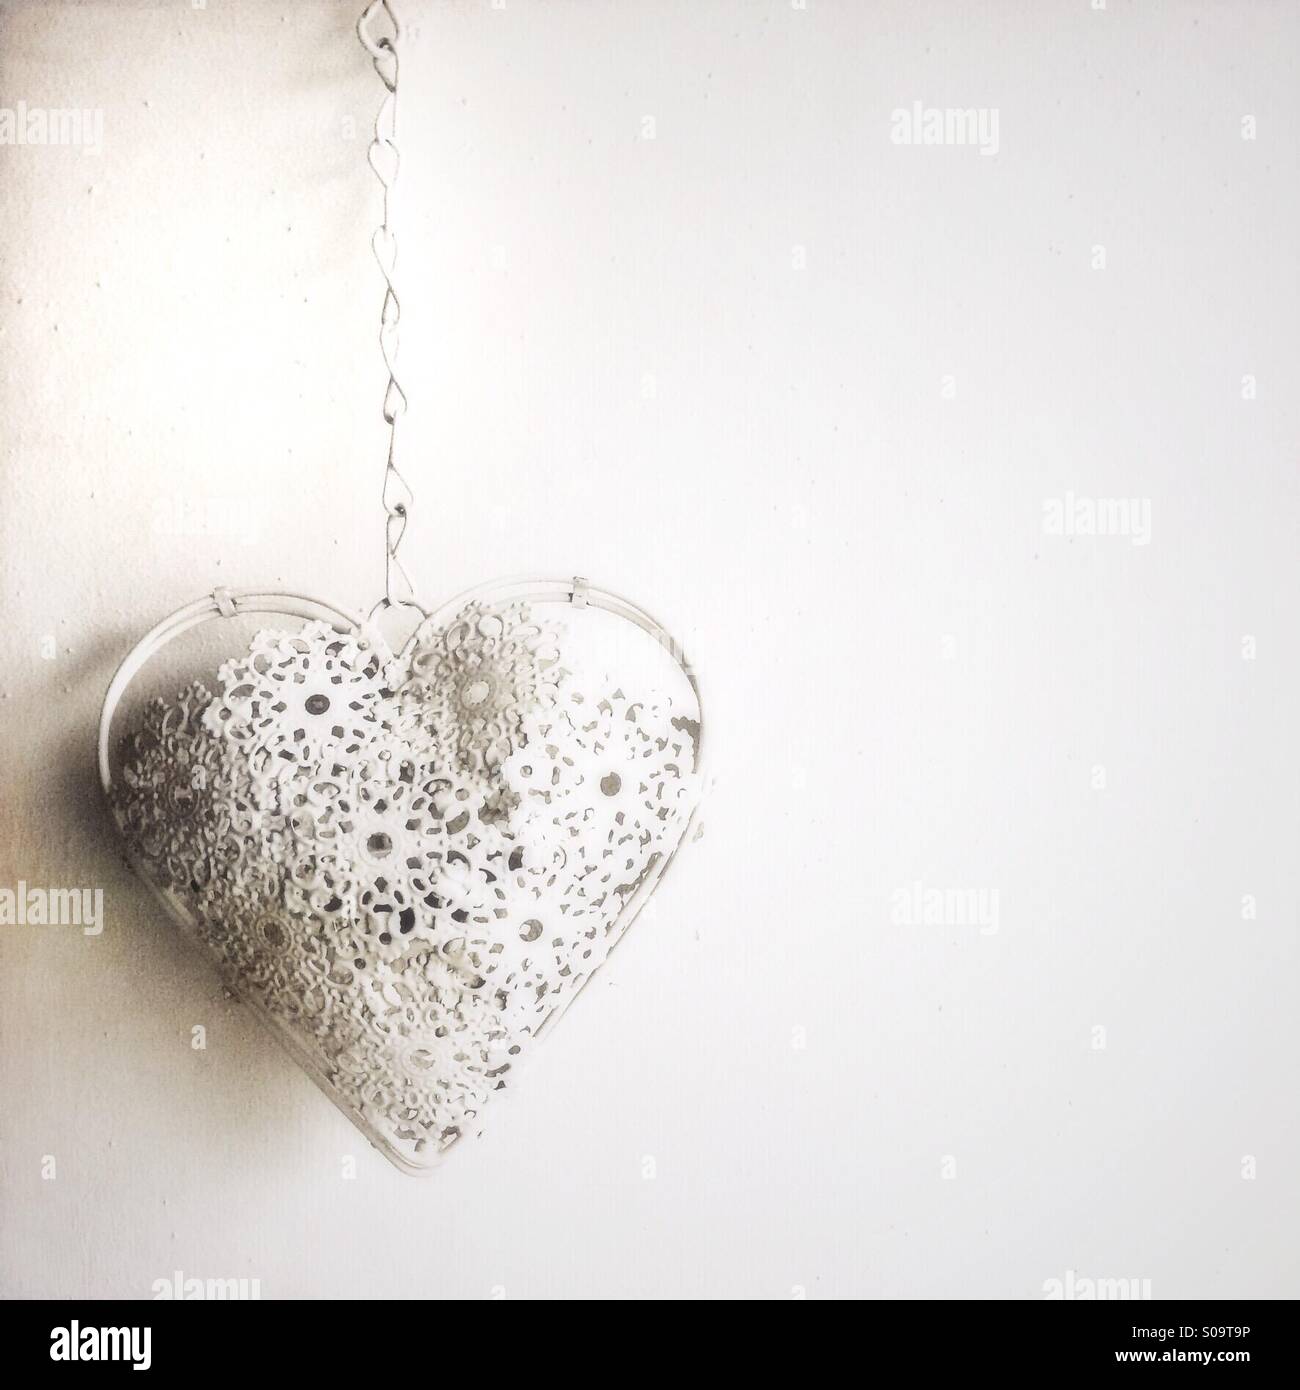 Heart hanging on a chain Stock Photo